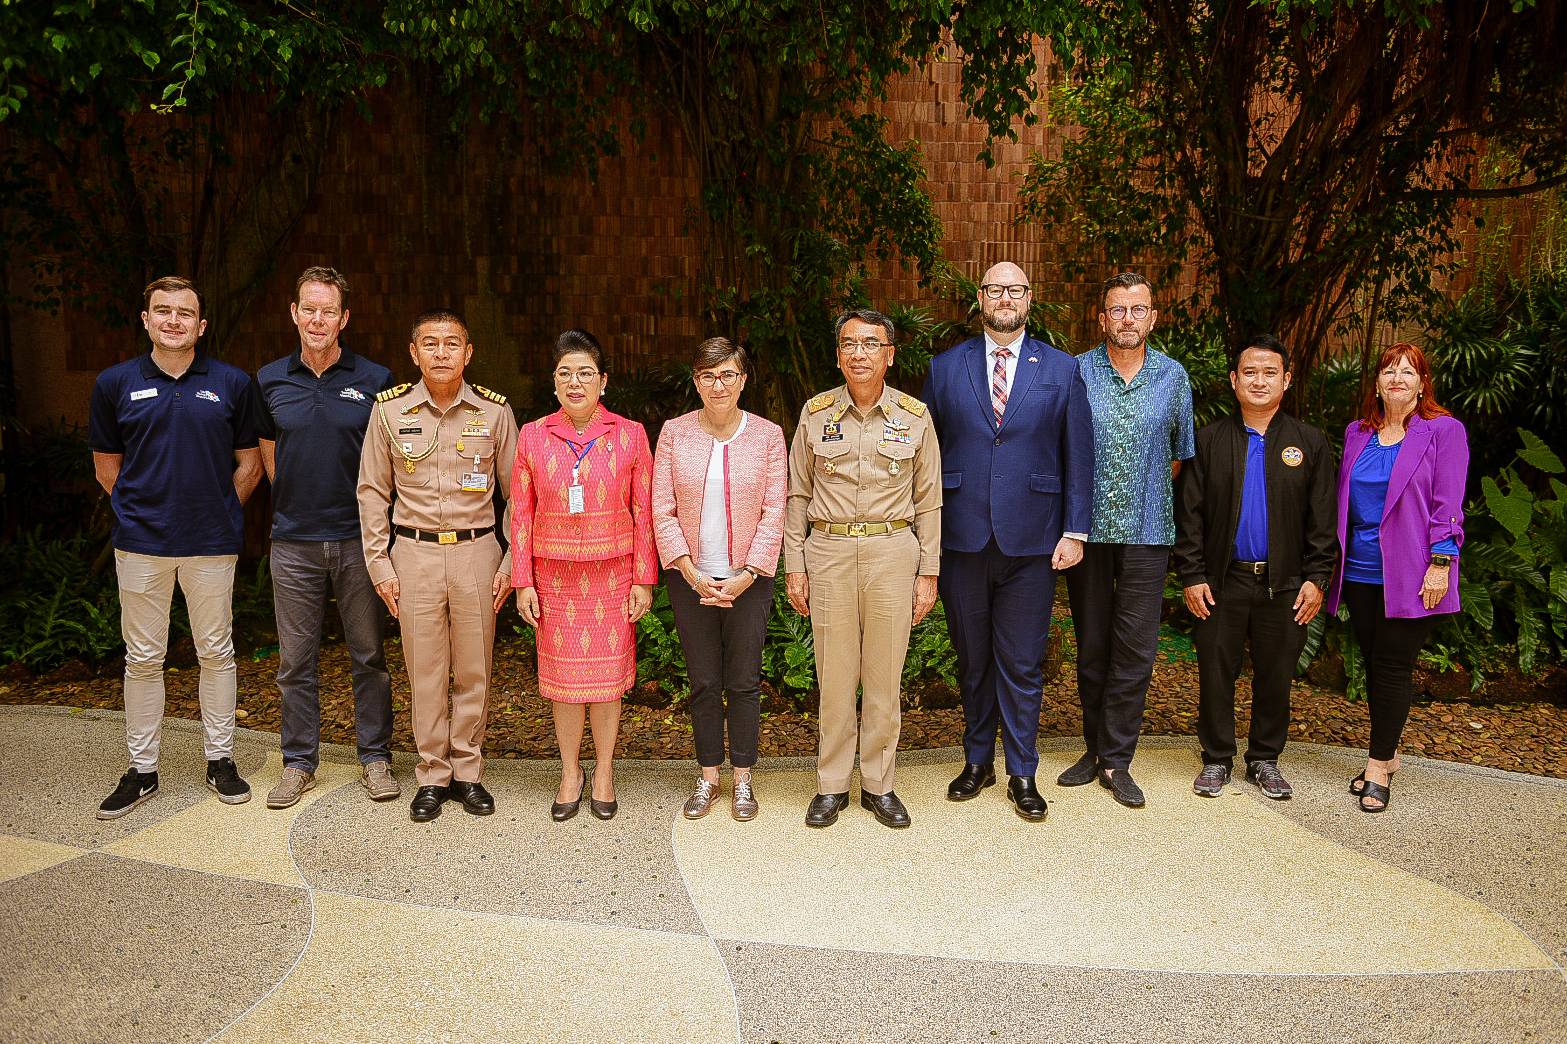 Pictured at the “Collaboration in Water Safety” seminar on 25th July (from left to right): Mr. Jack Kennedy, life saving trainer, LSV; Mr. Peter Gibney, life saving trainer, LSV; Col. Bannawit Chalermthong, Deputy Commander-in-Chief, Phang Nga Naval Base Third Area Command; Khun Hathairat Rangsansarit, Deputy Director, Patong Hospital; Dr. Angela Macdonald PSM, The Ambassador of Australia to Thailand; Mr. Danai Sununtarod, Deputy Governor, Governor’s Office; Mr. Matthew Barclay, Consul-General, Australian Consulate-General, Phuket; Mr. Daniel Meury, Director, Phuket Hotels Association; Khun Hasachai Noourai, Representative, Phuket Office of Tourism & Sports; and Ms. Jayne MacDougall, Executive Director, Phuket Hotels Association